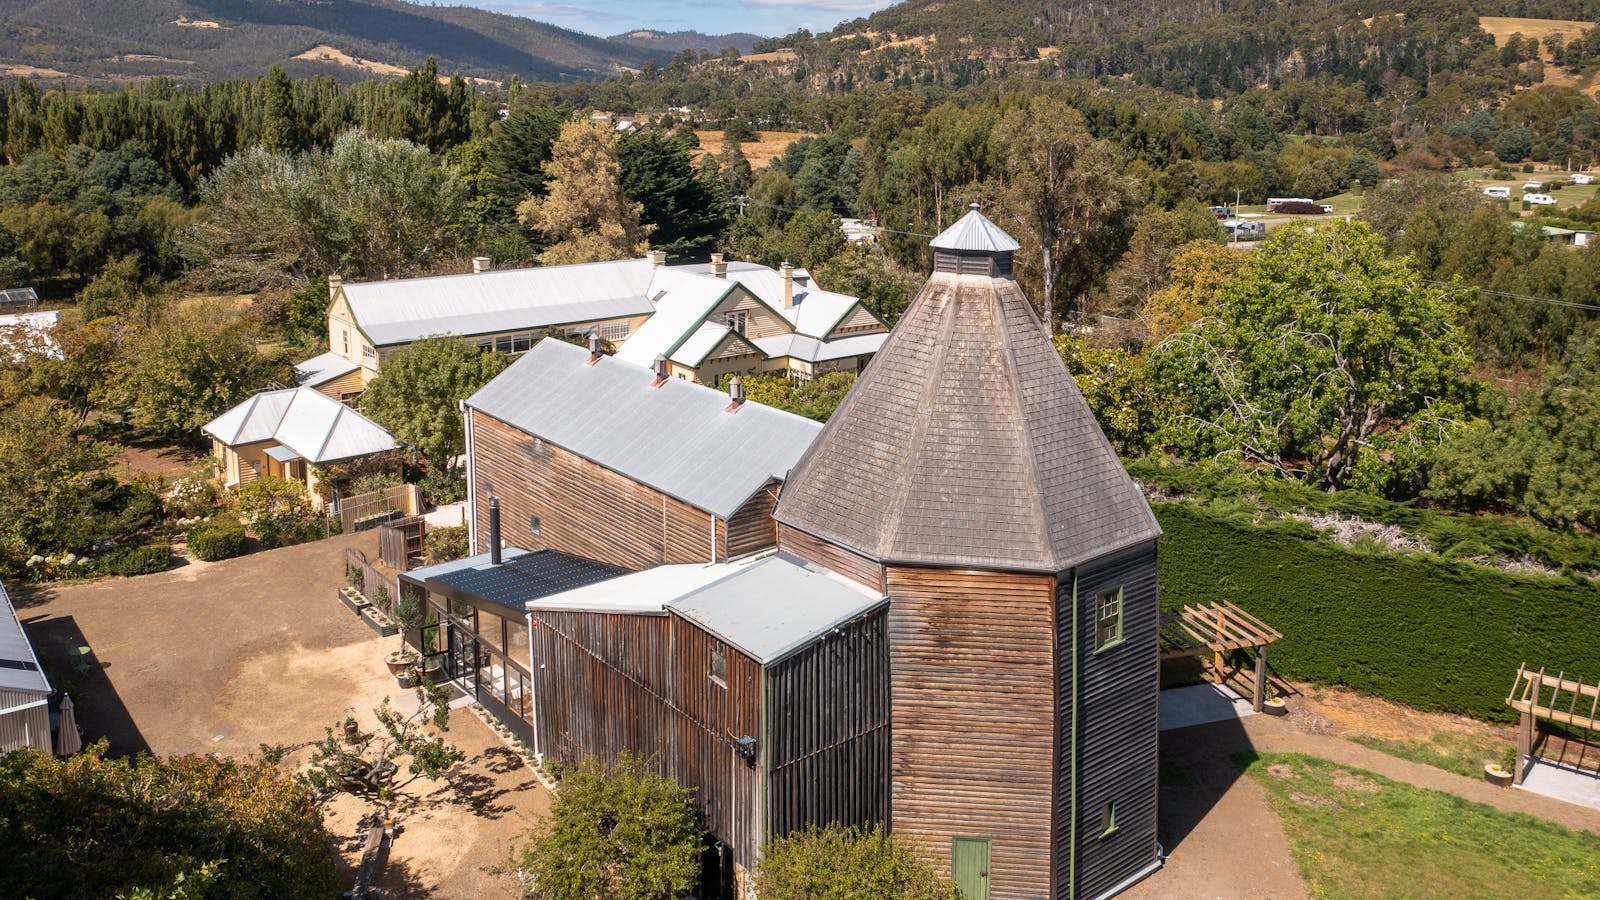 The Kiln is located in Tasmania's stunning Huon Valley, and sits next to Clifton Homestead.